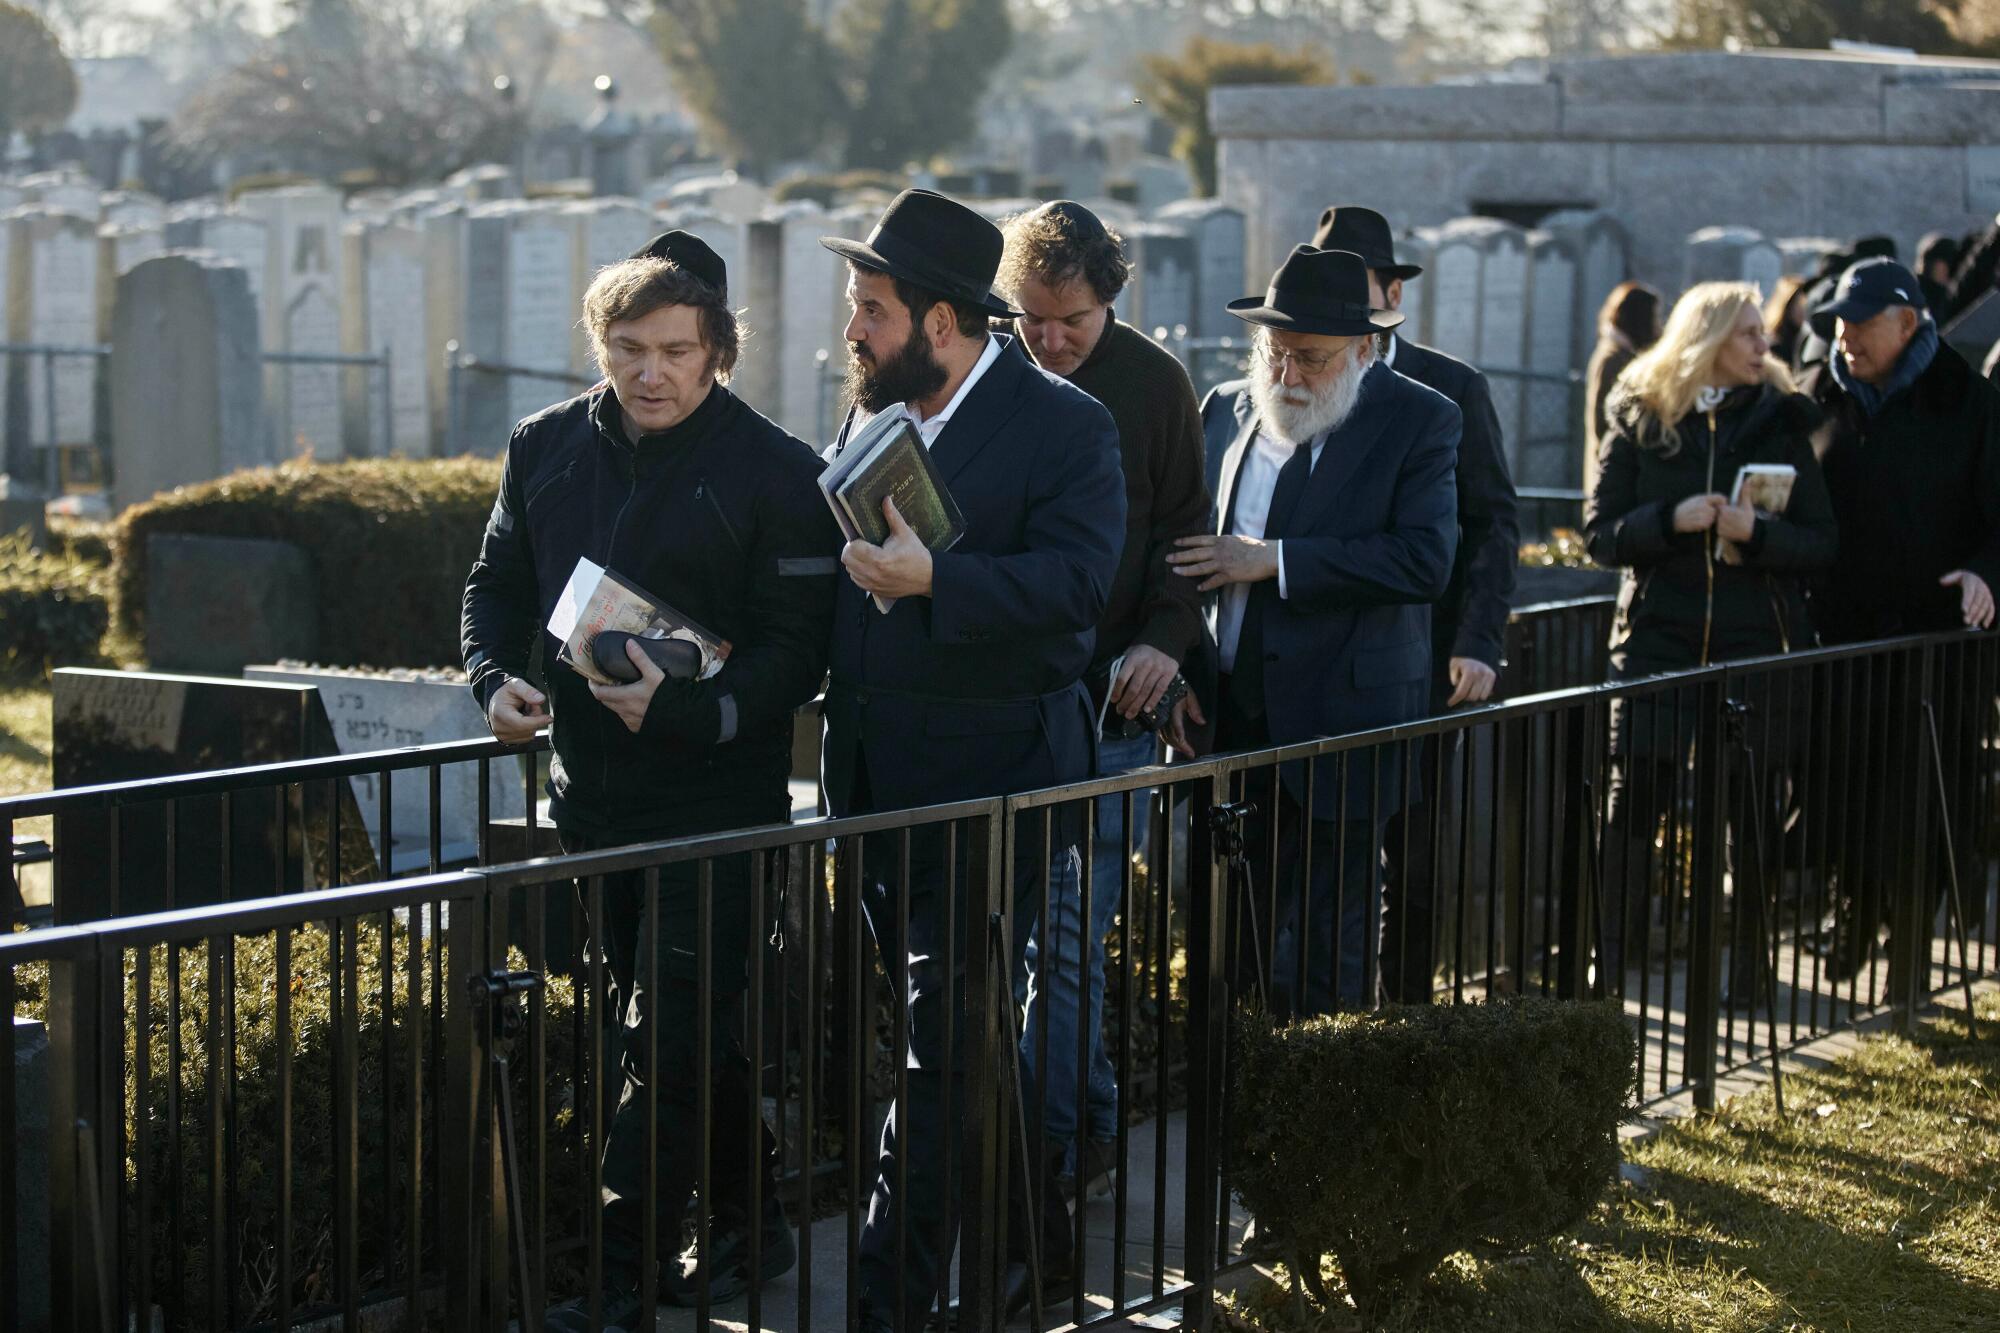 Several people, some dressed as Orthodox Jews, walk in a cemetery